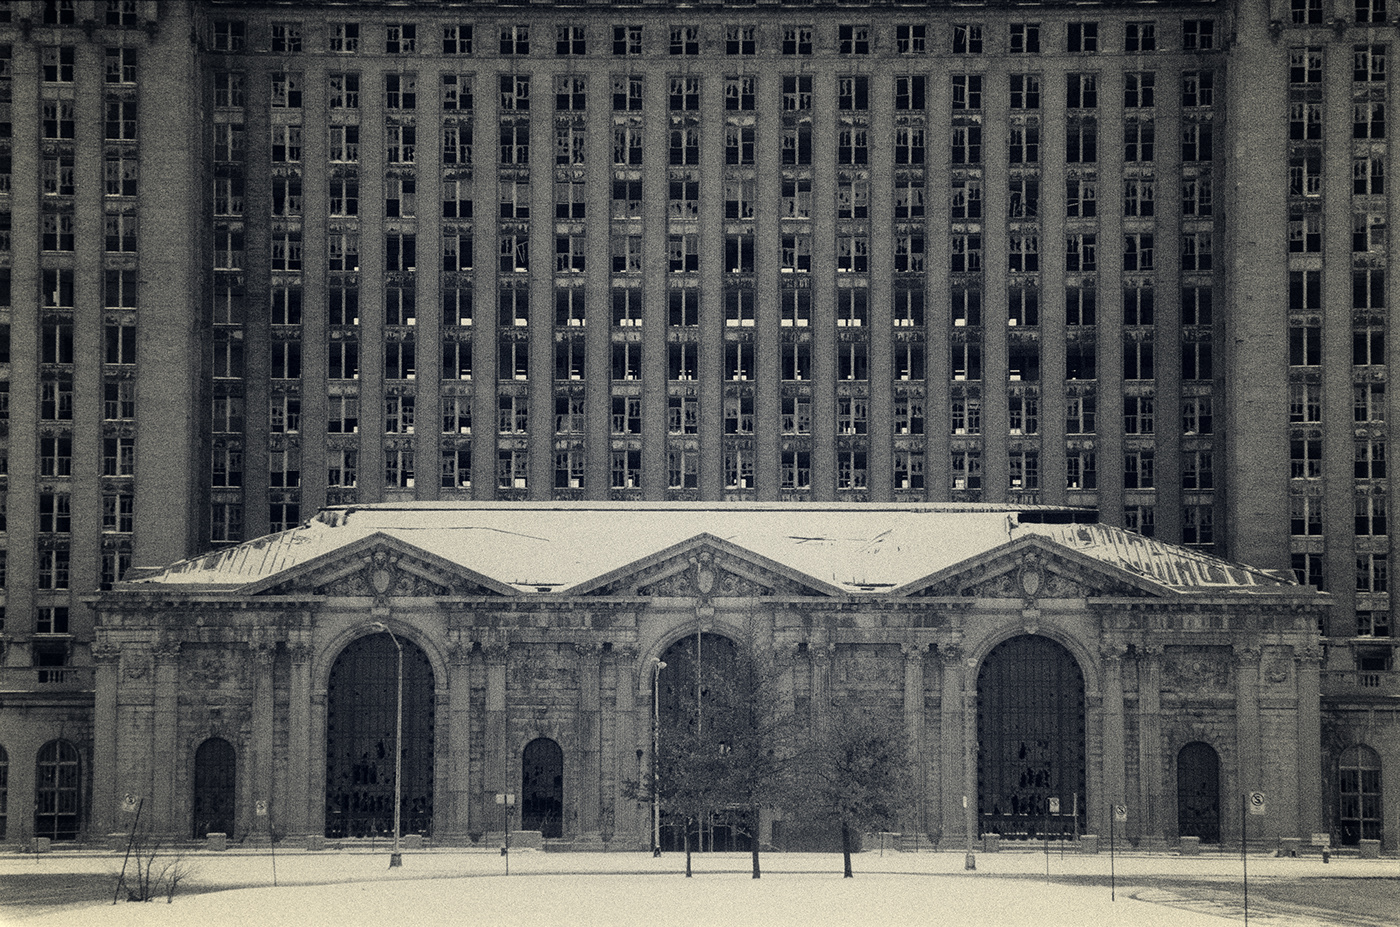 Michigan Central Station, on a winter morning, in Detroit, Michigan.